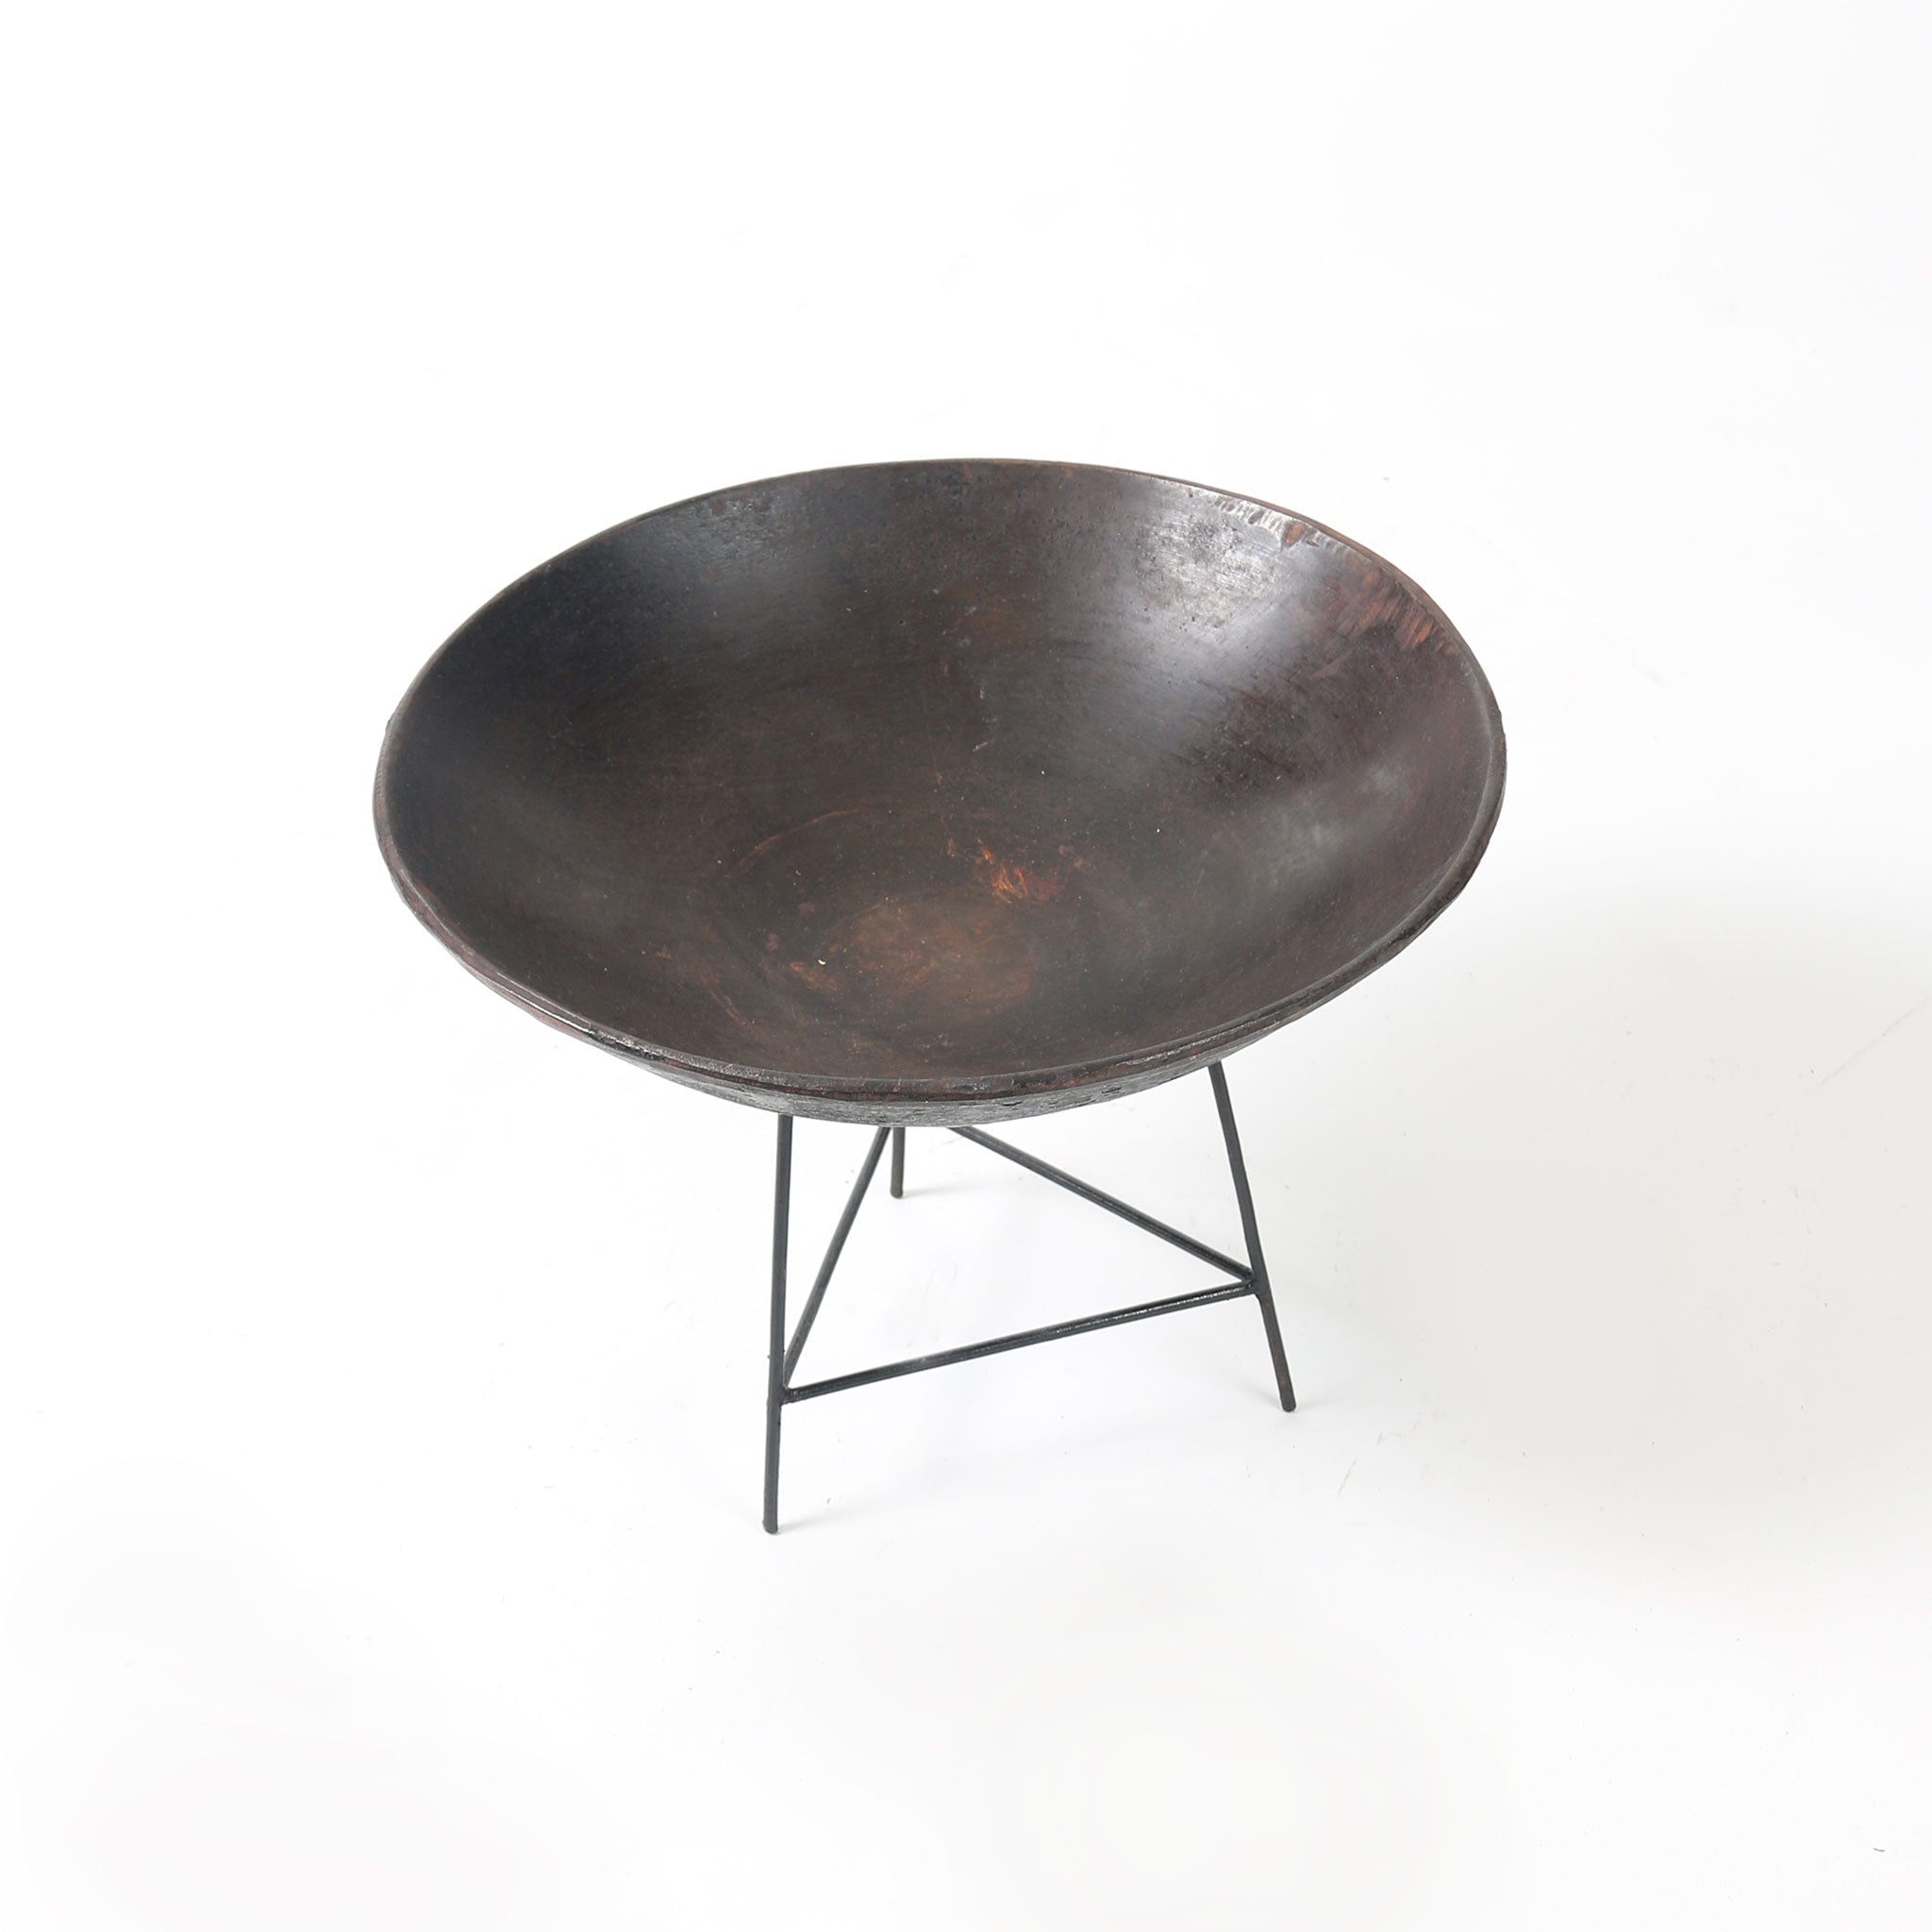 Rustic Small Cast Iron Bowl and Steel Stand